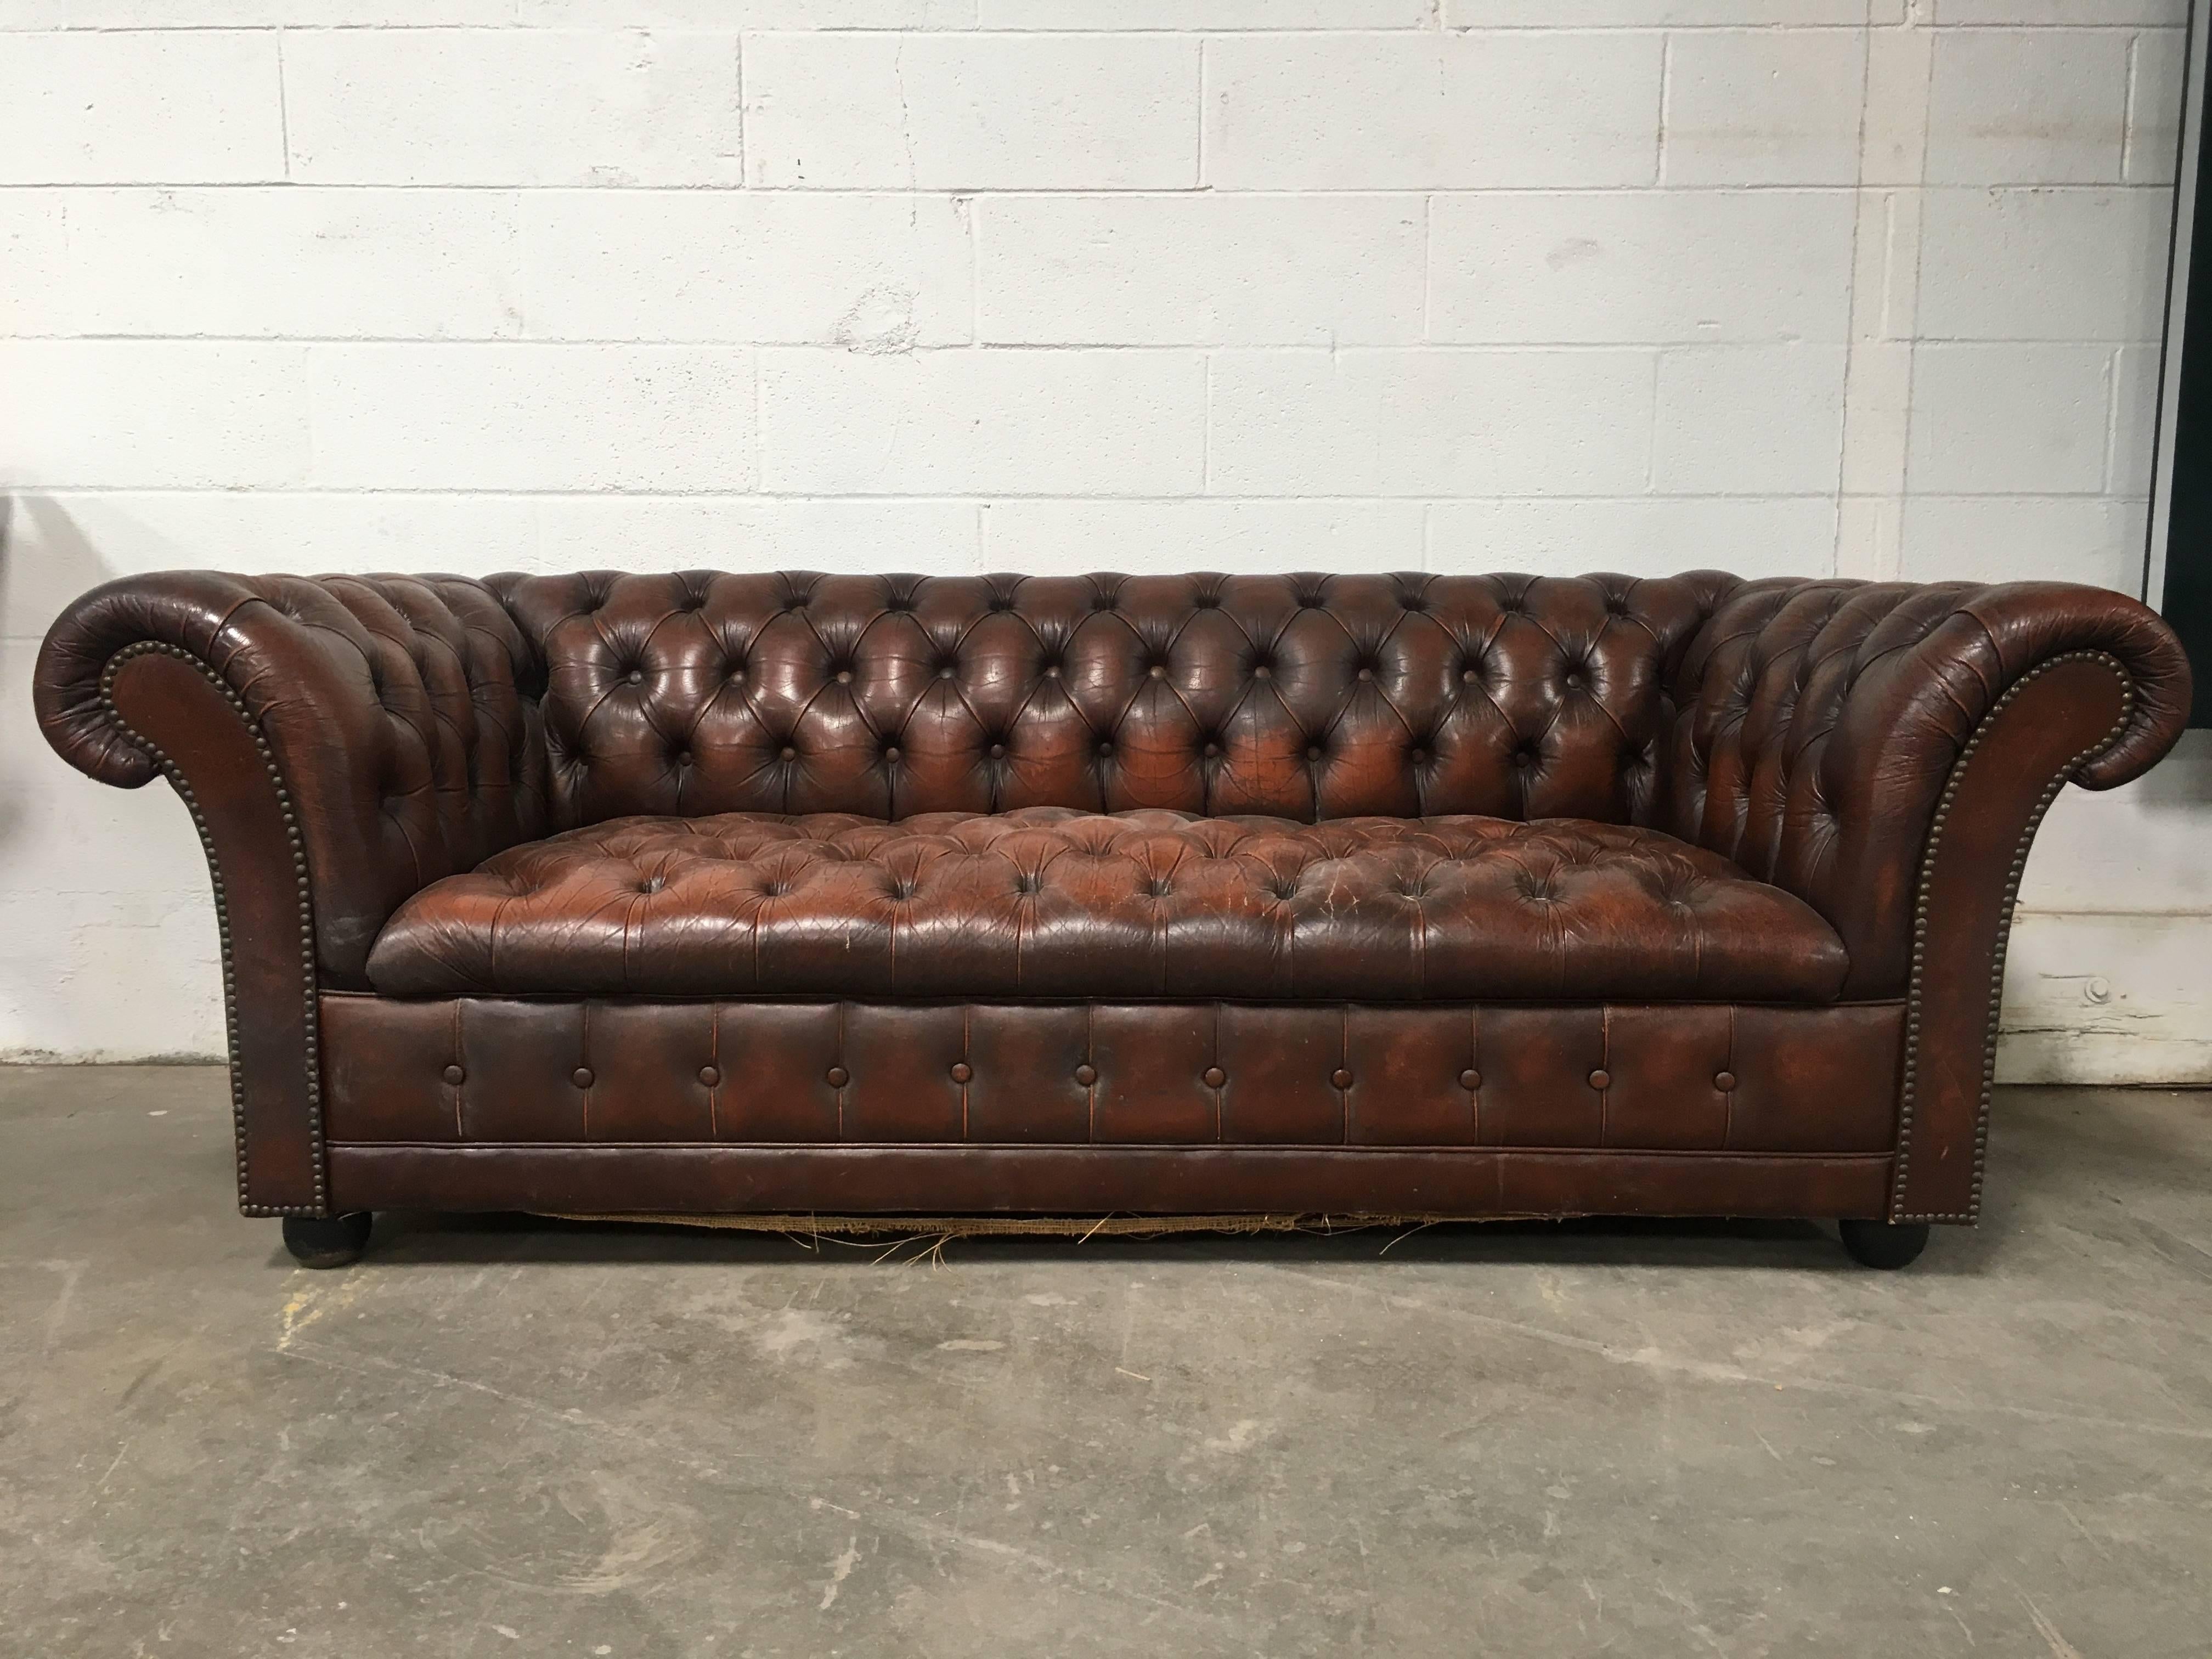 Vintage Chesterfield sofa in tufted brown leather. Shapely, curved arm rests with nailhead trim. Seat depth: 21